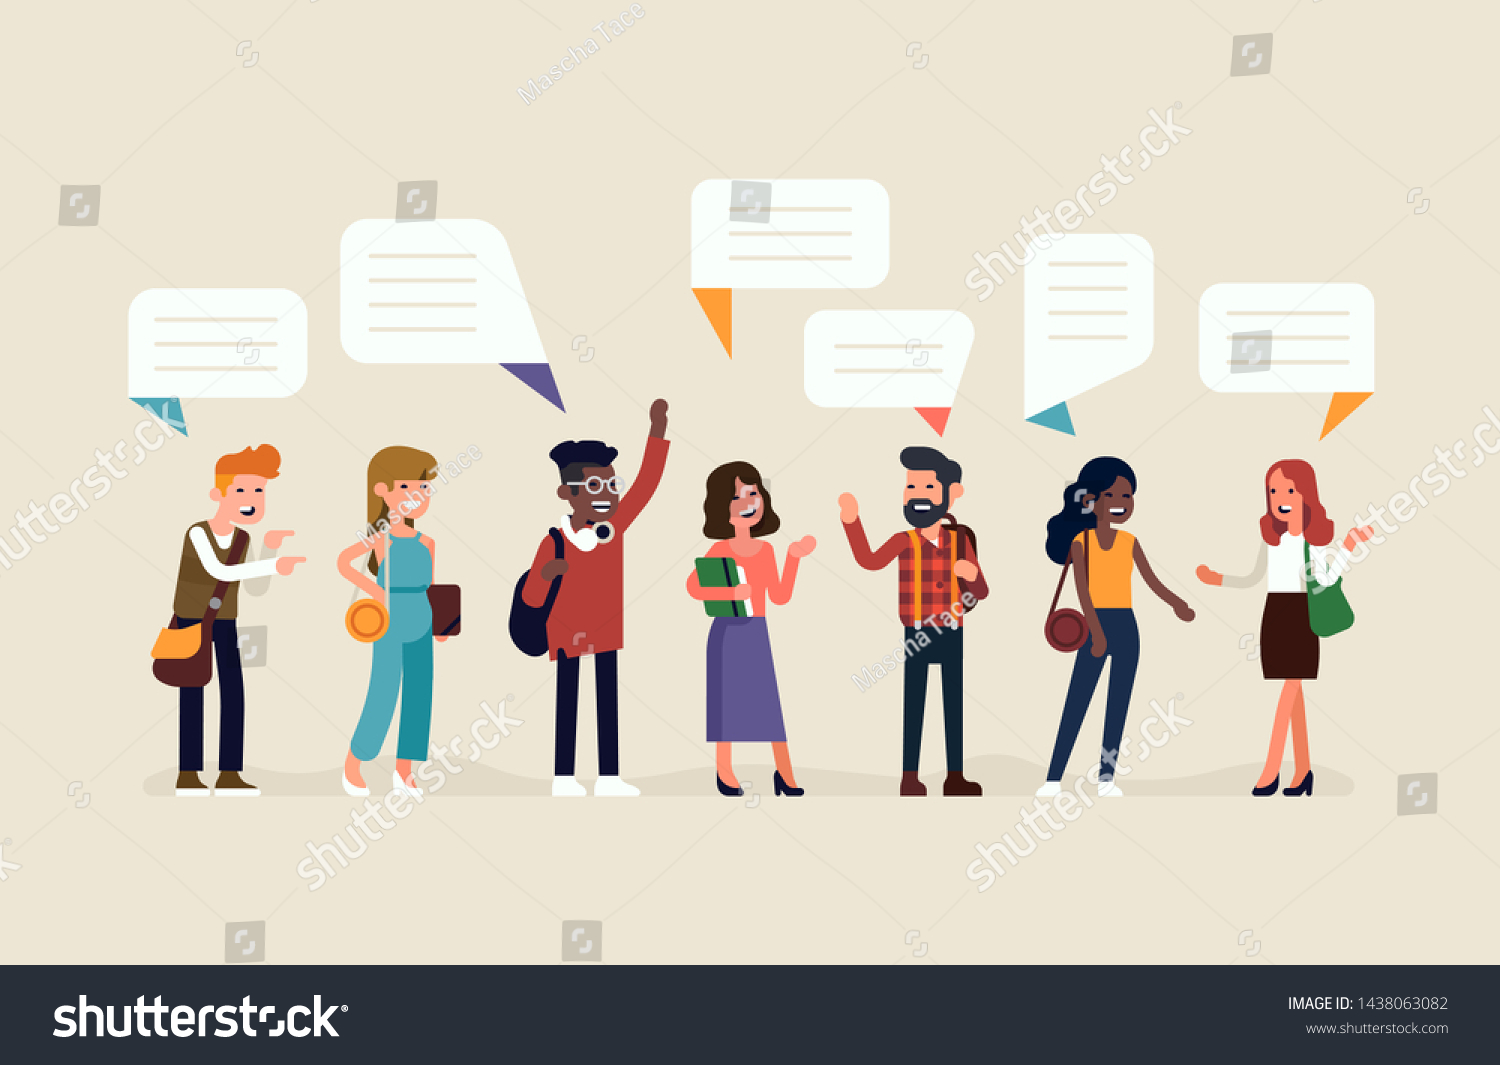 SVG of Flat vector illustration on talking and discussion. Diverse group of positive characters talking to each other. Different people in conversation and interaction poses svg